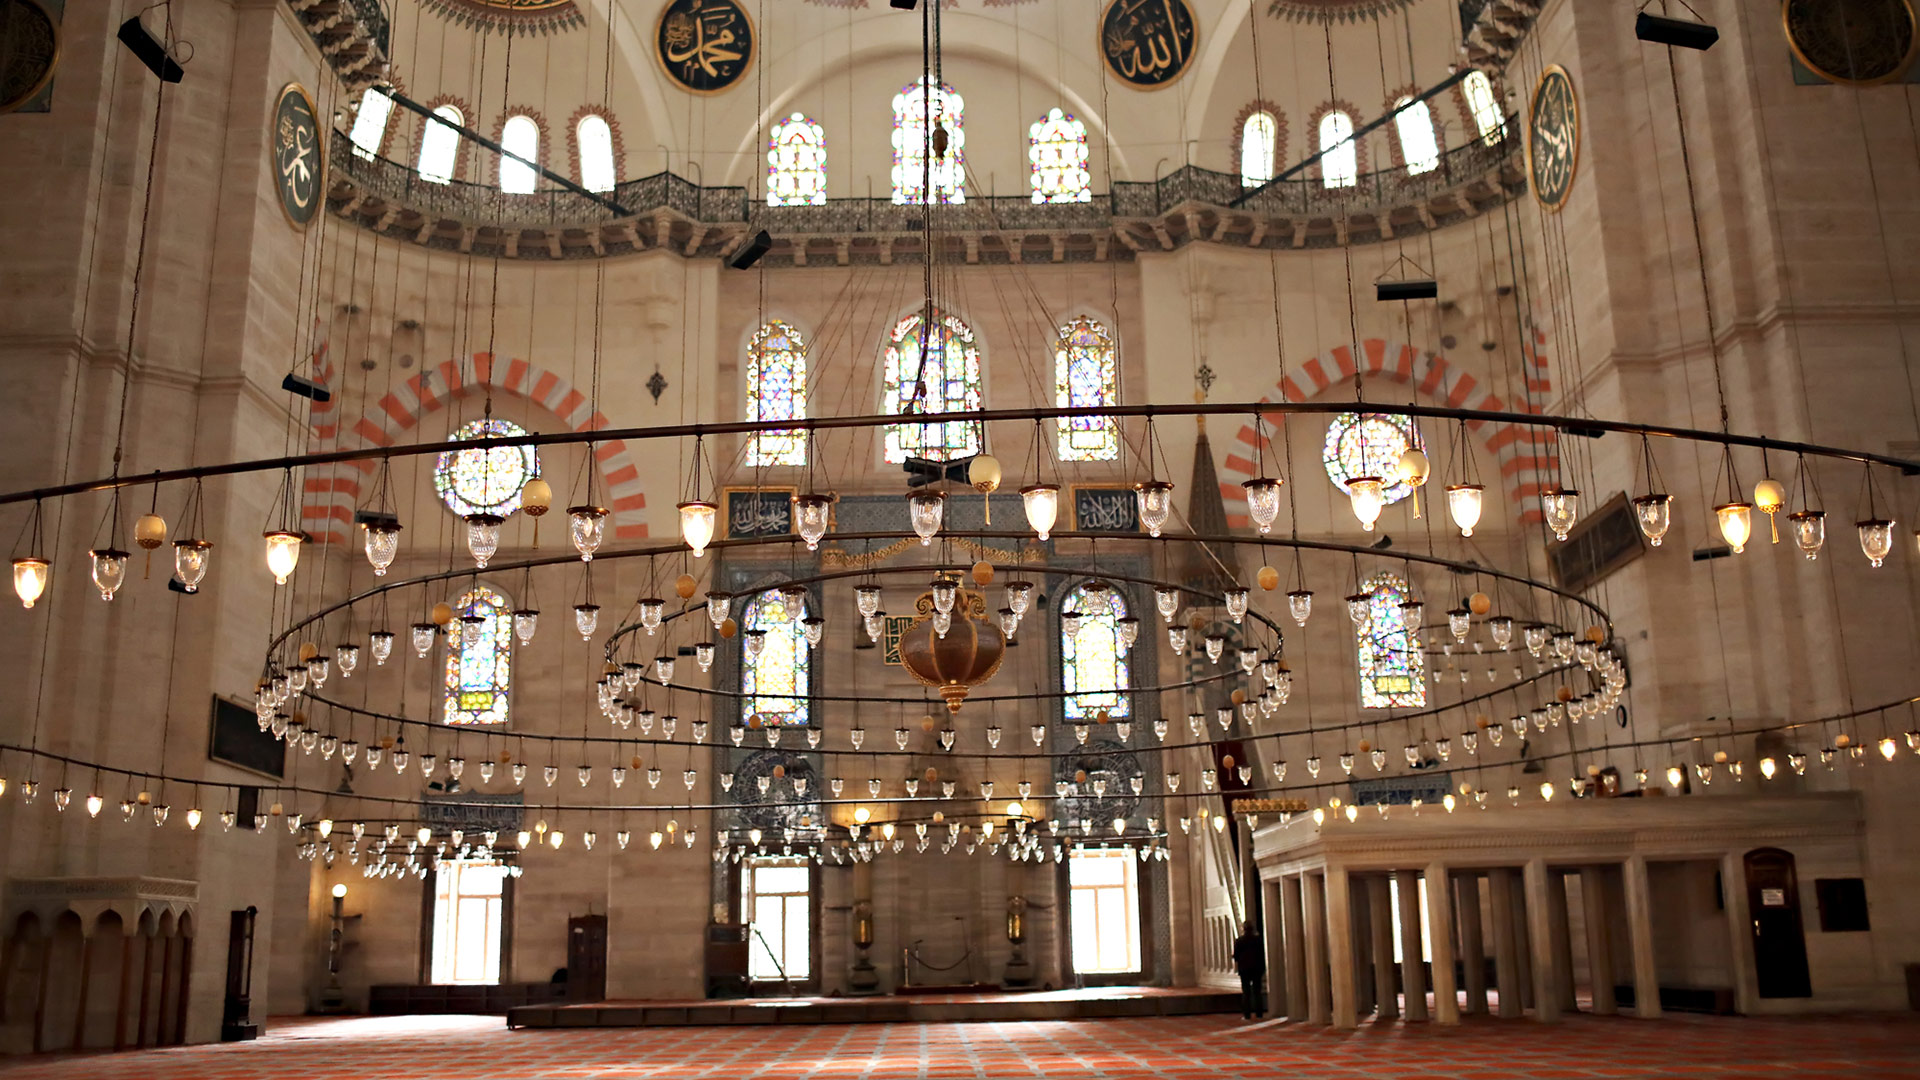 the interior of the Suleymaniye mosque